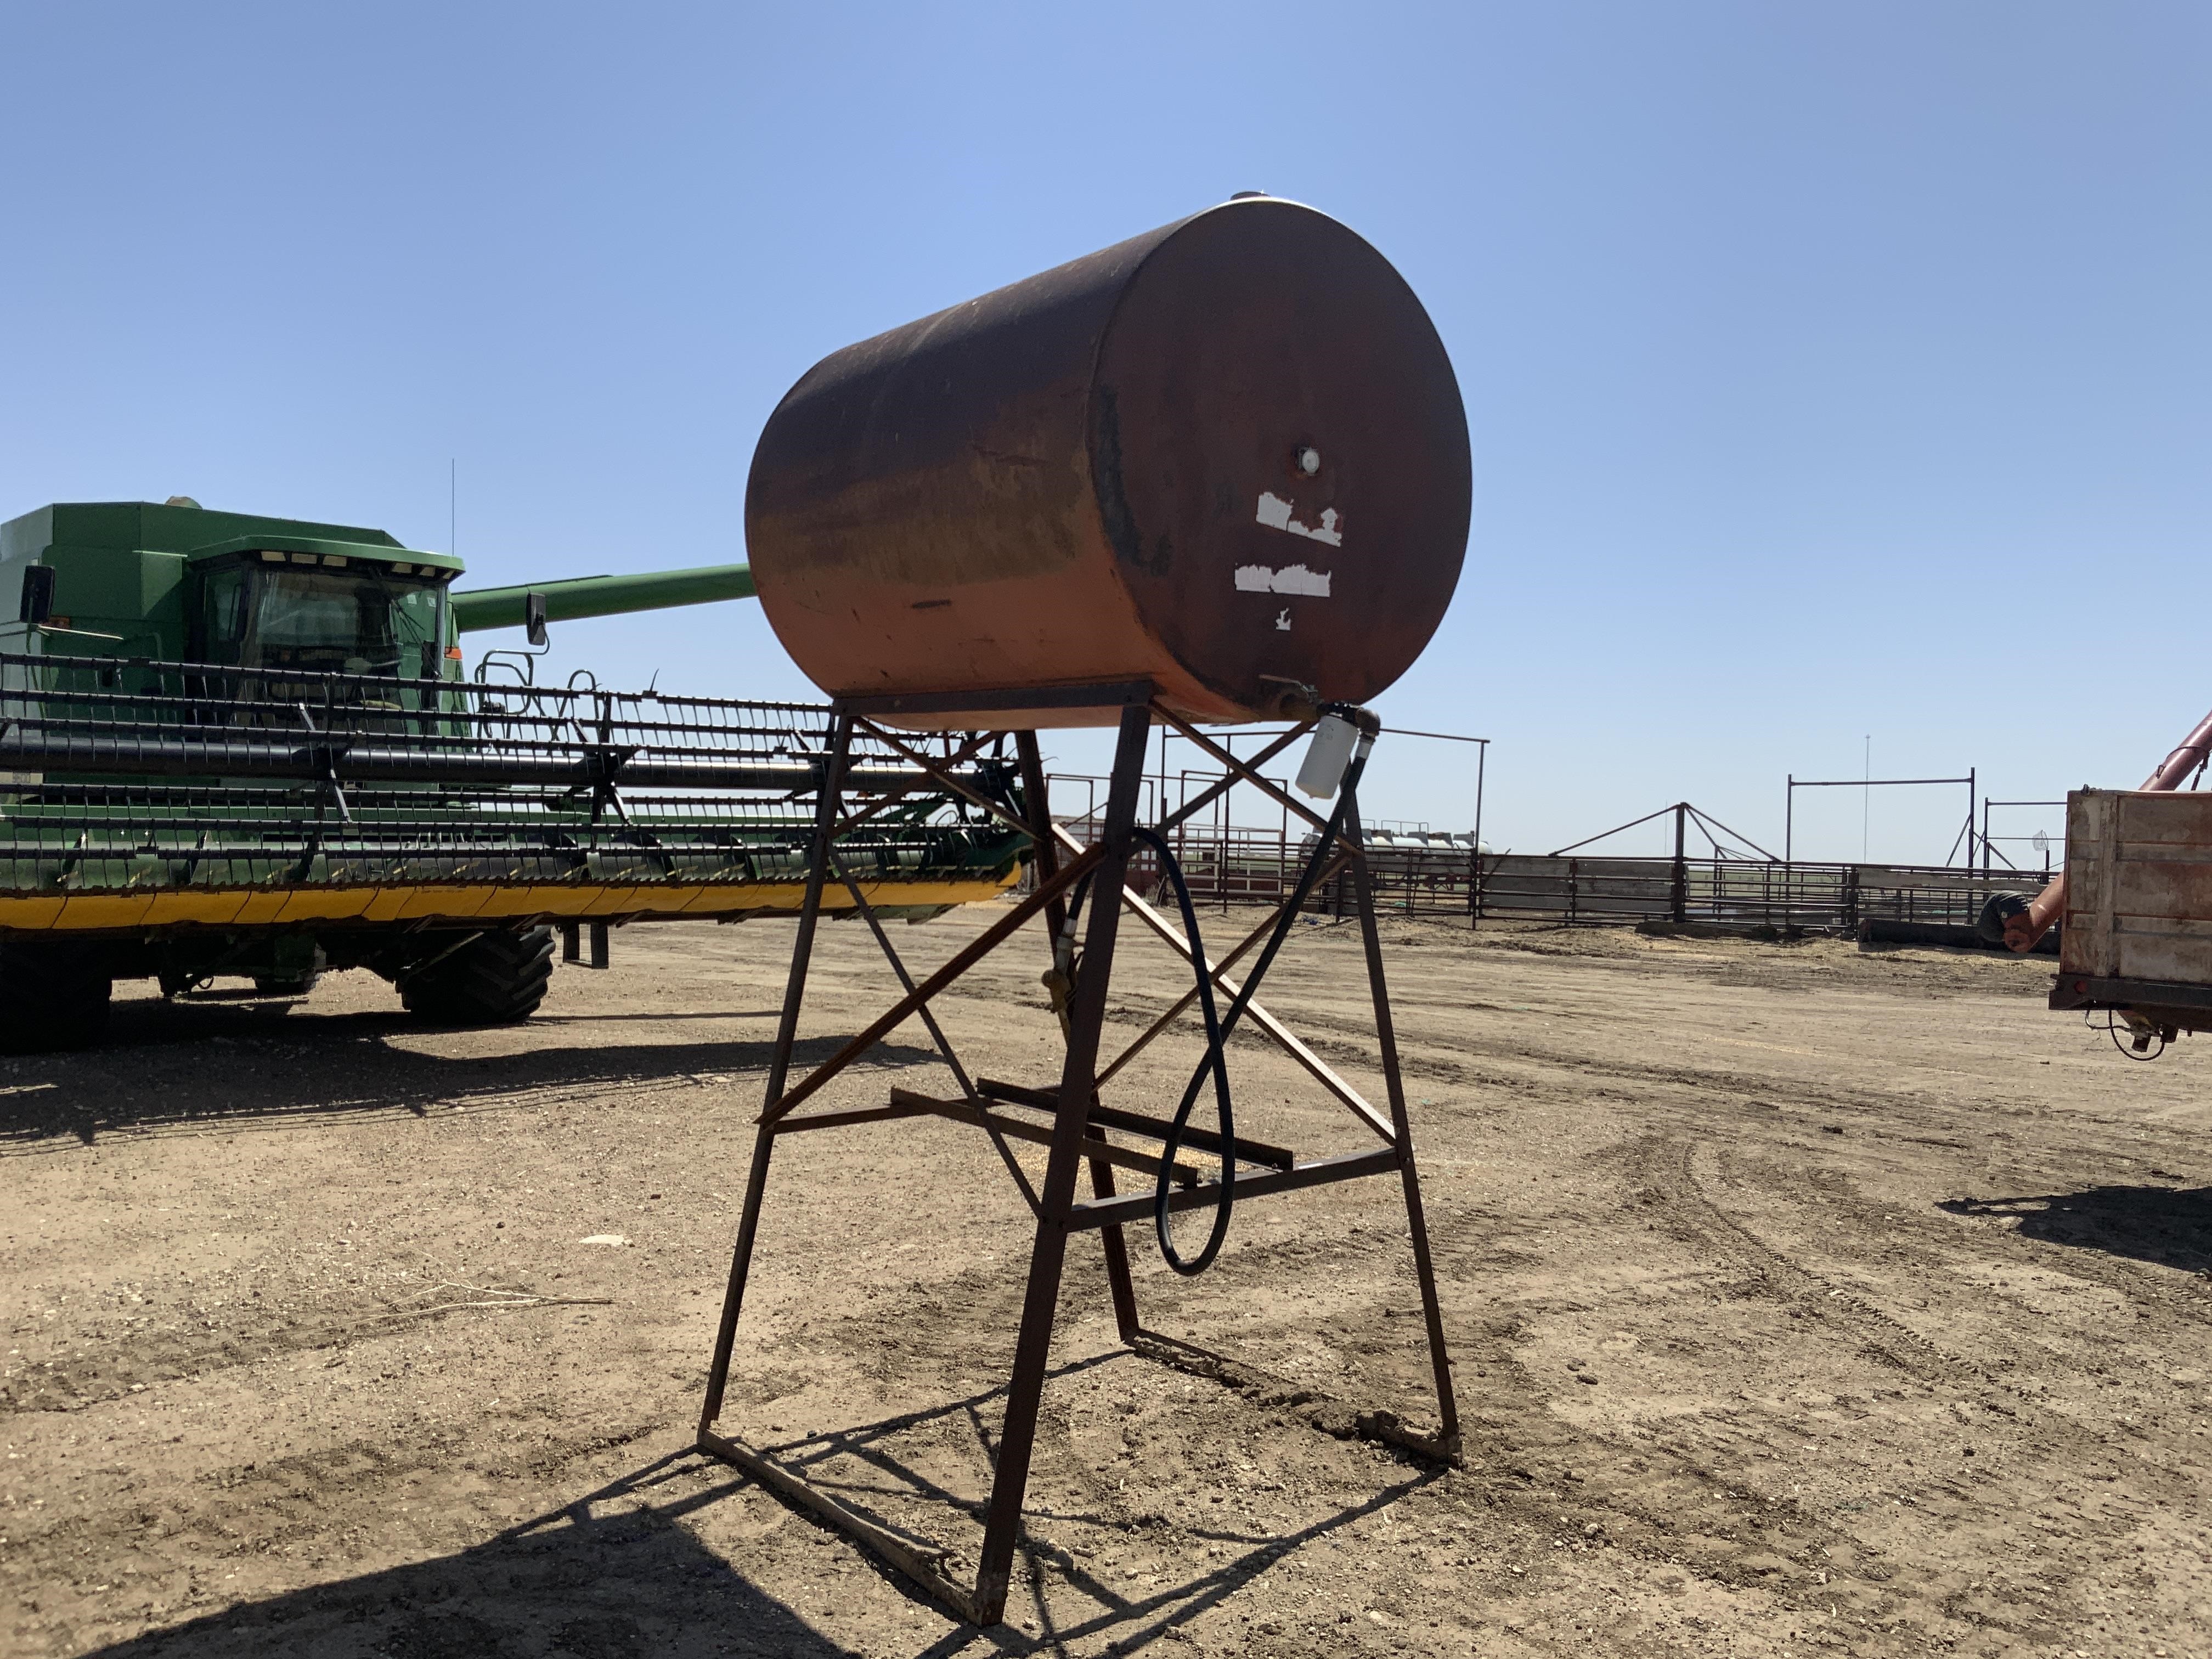 500 Gallon Overhead Farm Fuel Tanks with Stand - Complete